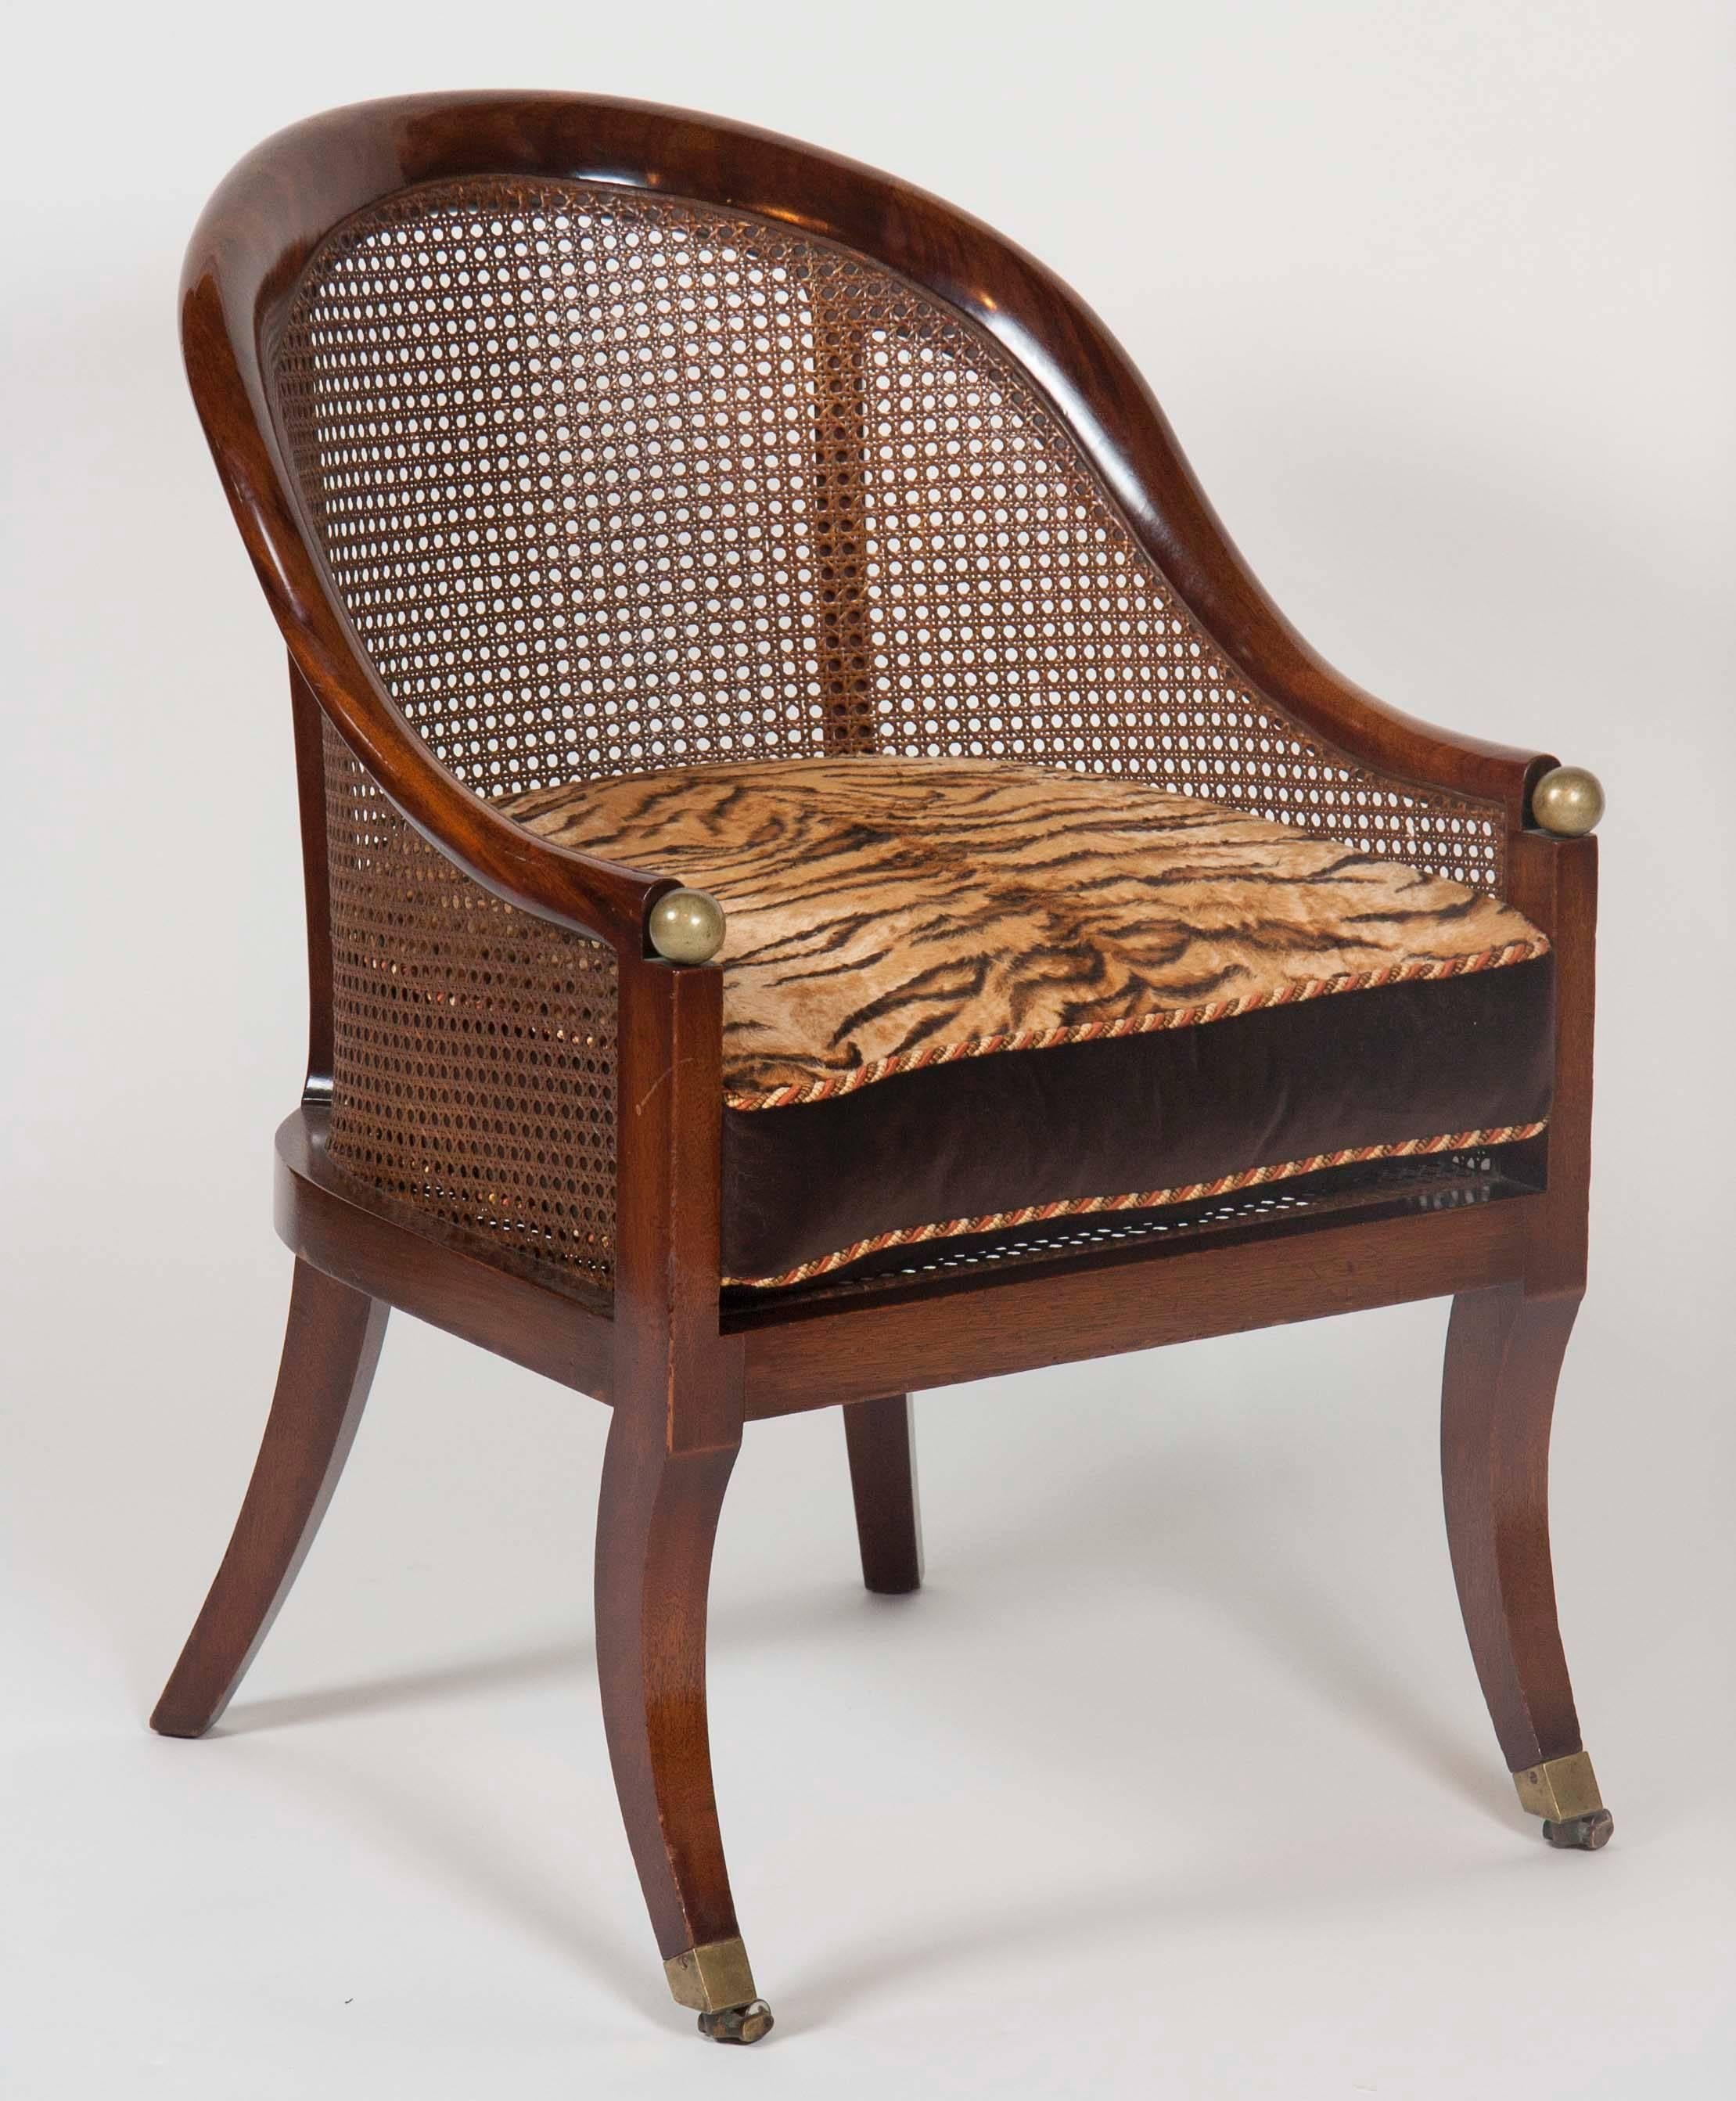 Each with arched rounded back and straight seat and caned overall raised on saber legs and casters, with cushions.